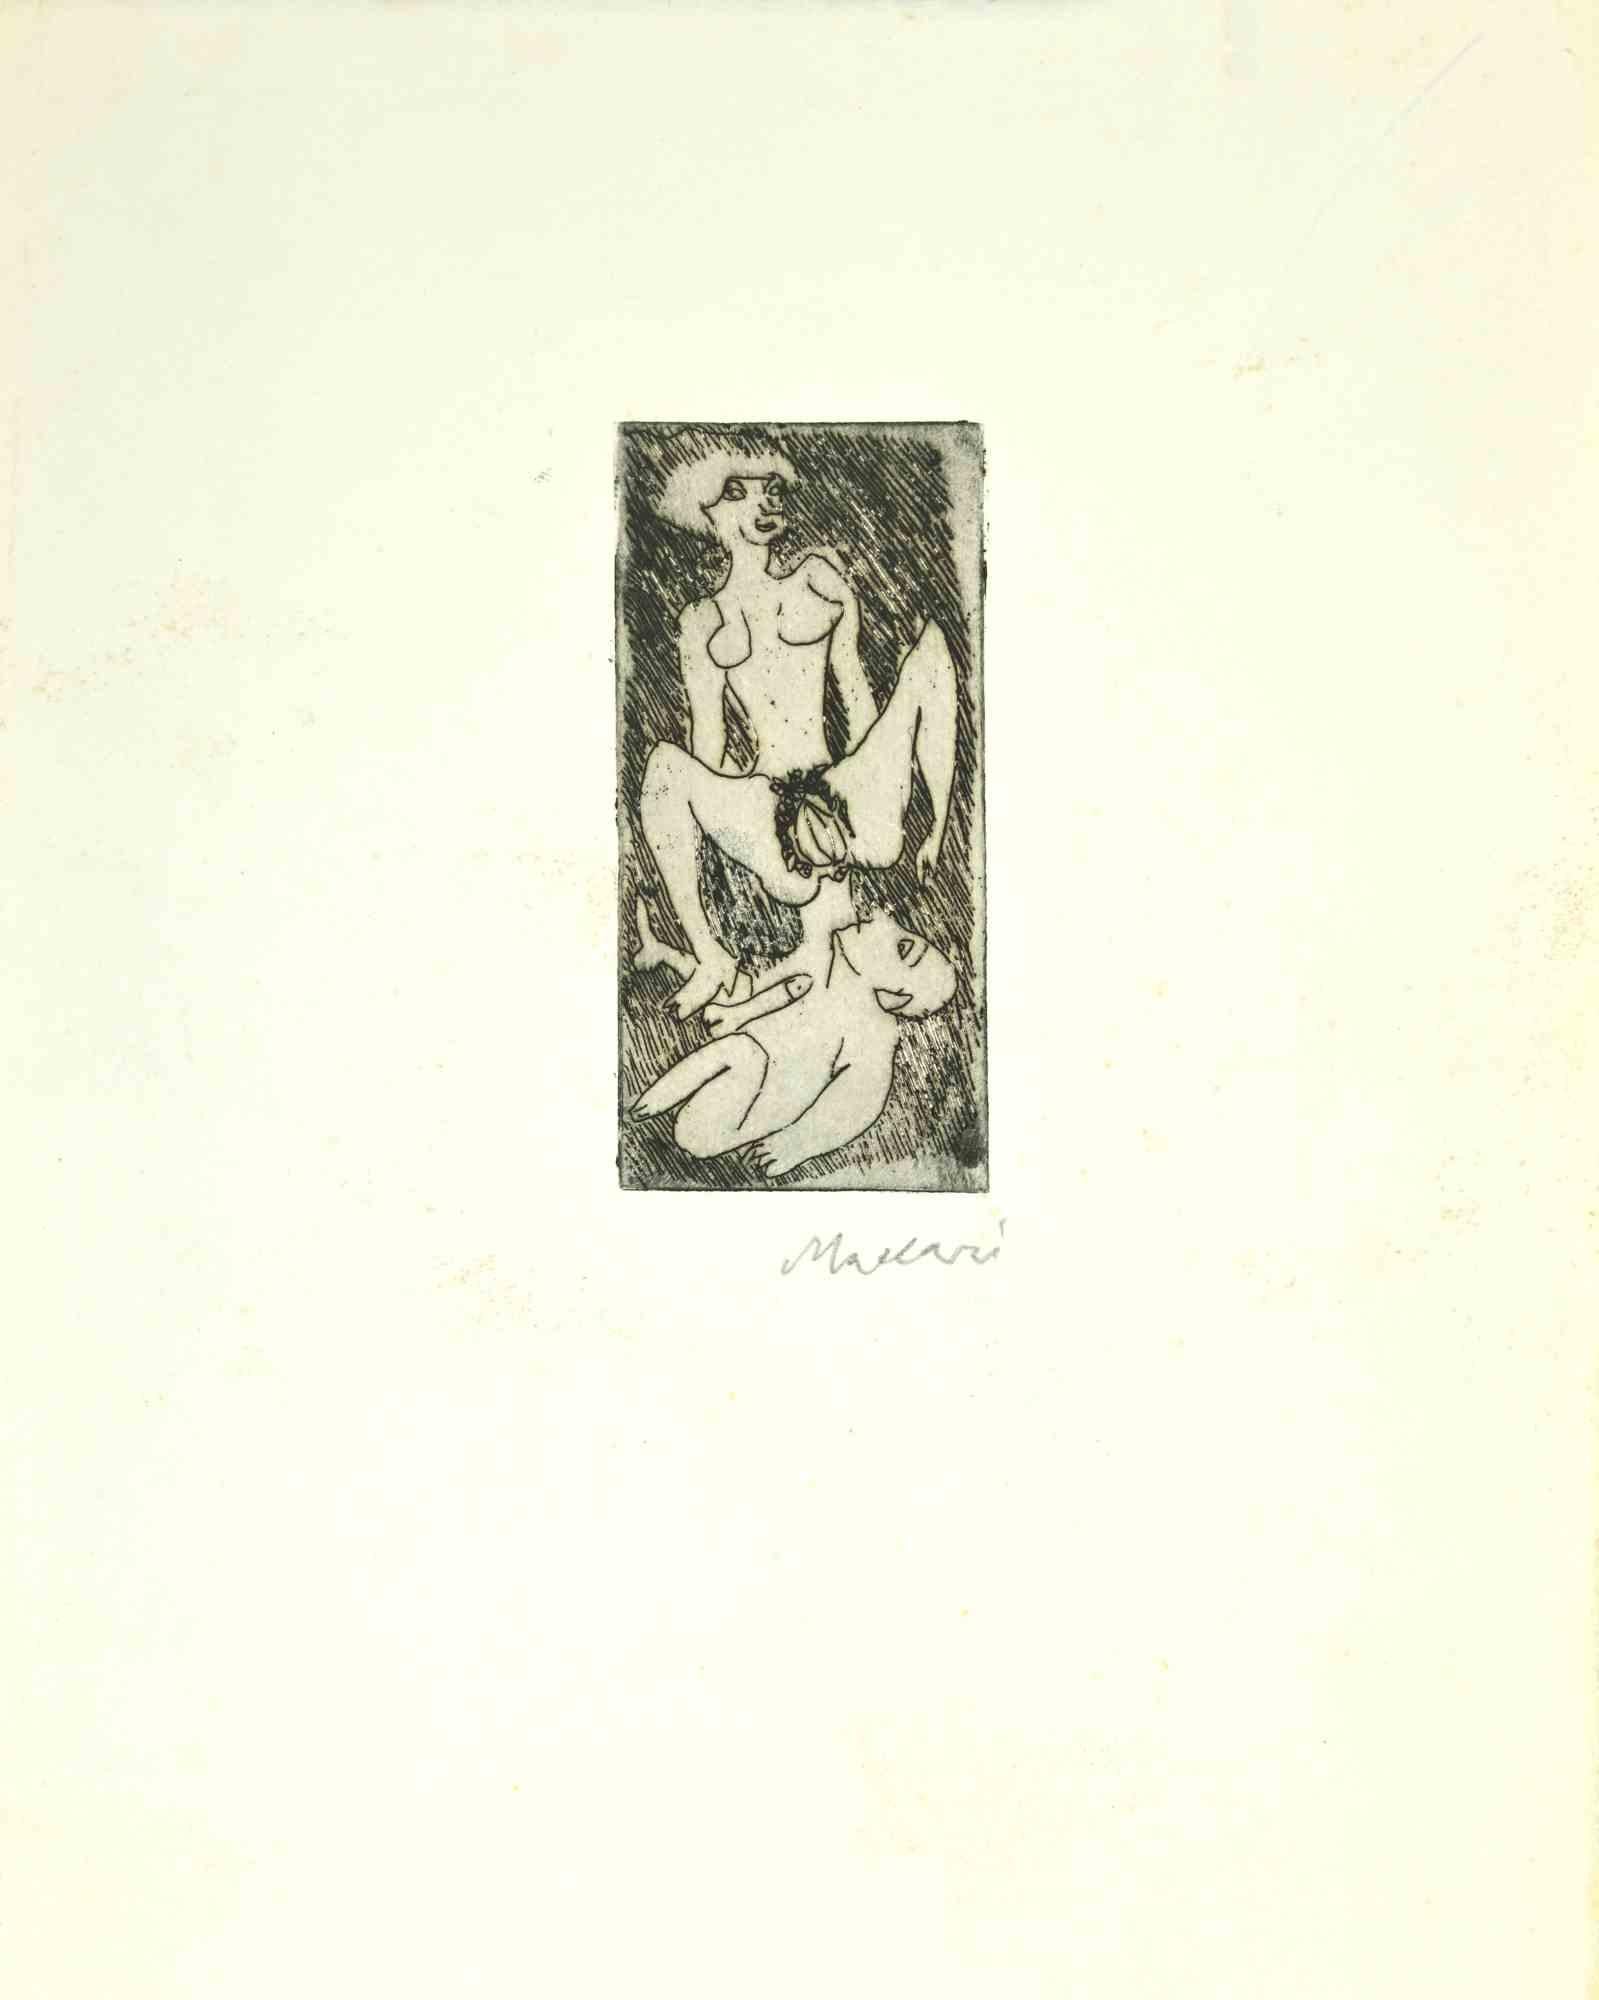 Erotic Scene is an Etching and Drypoint realized by Mino Maccari in the Mid-20th Century.

Hand-signed in the lower part.

Good conditions.

 

Mino Maccari (Siena, 1924-Rome, June 16, 1989) was an Italian writer, painter, engraver and journalist,